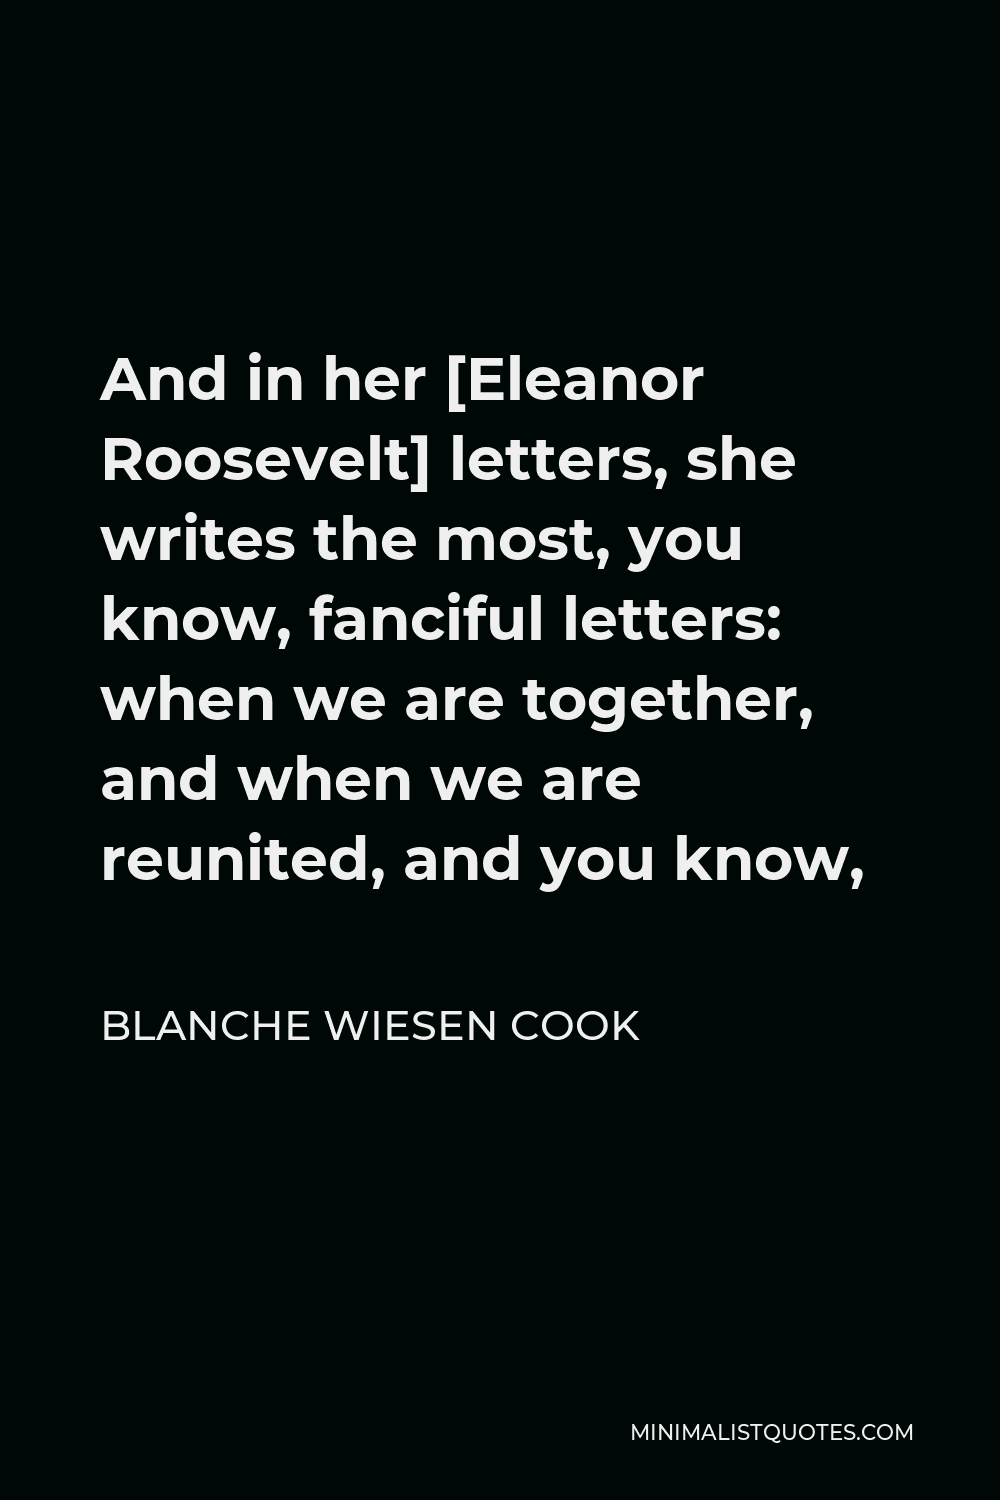 Blanche Wiesen Cook Quote - And in her [Eleanor Roosevelt] letters, she writes the most, you know, fanciful letters: when we are together, and when we are reunited, and you know,